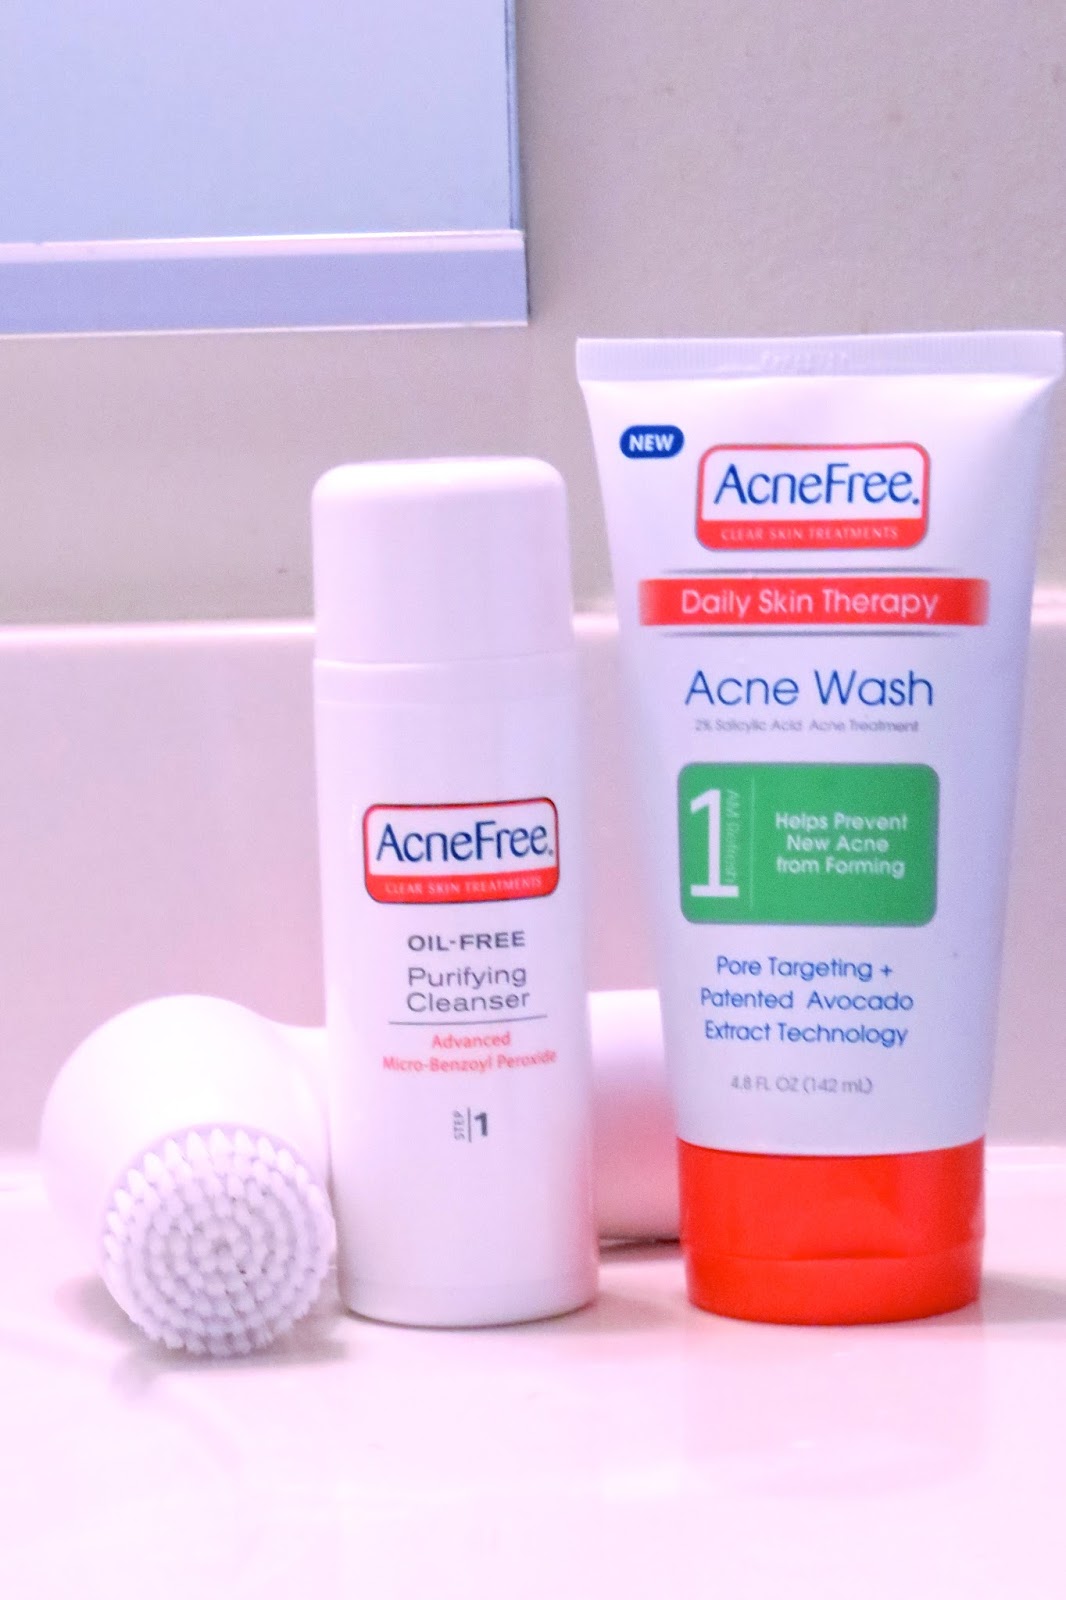 AcneFree Face cleansing products